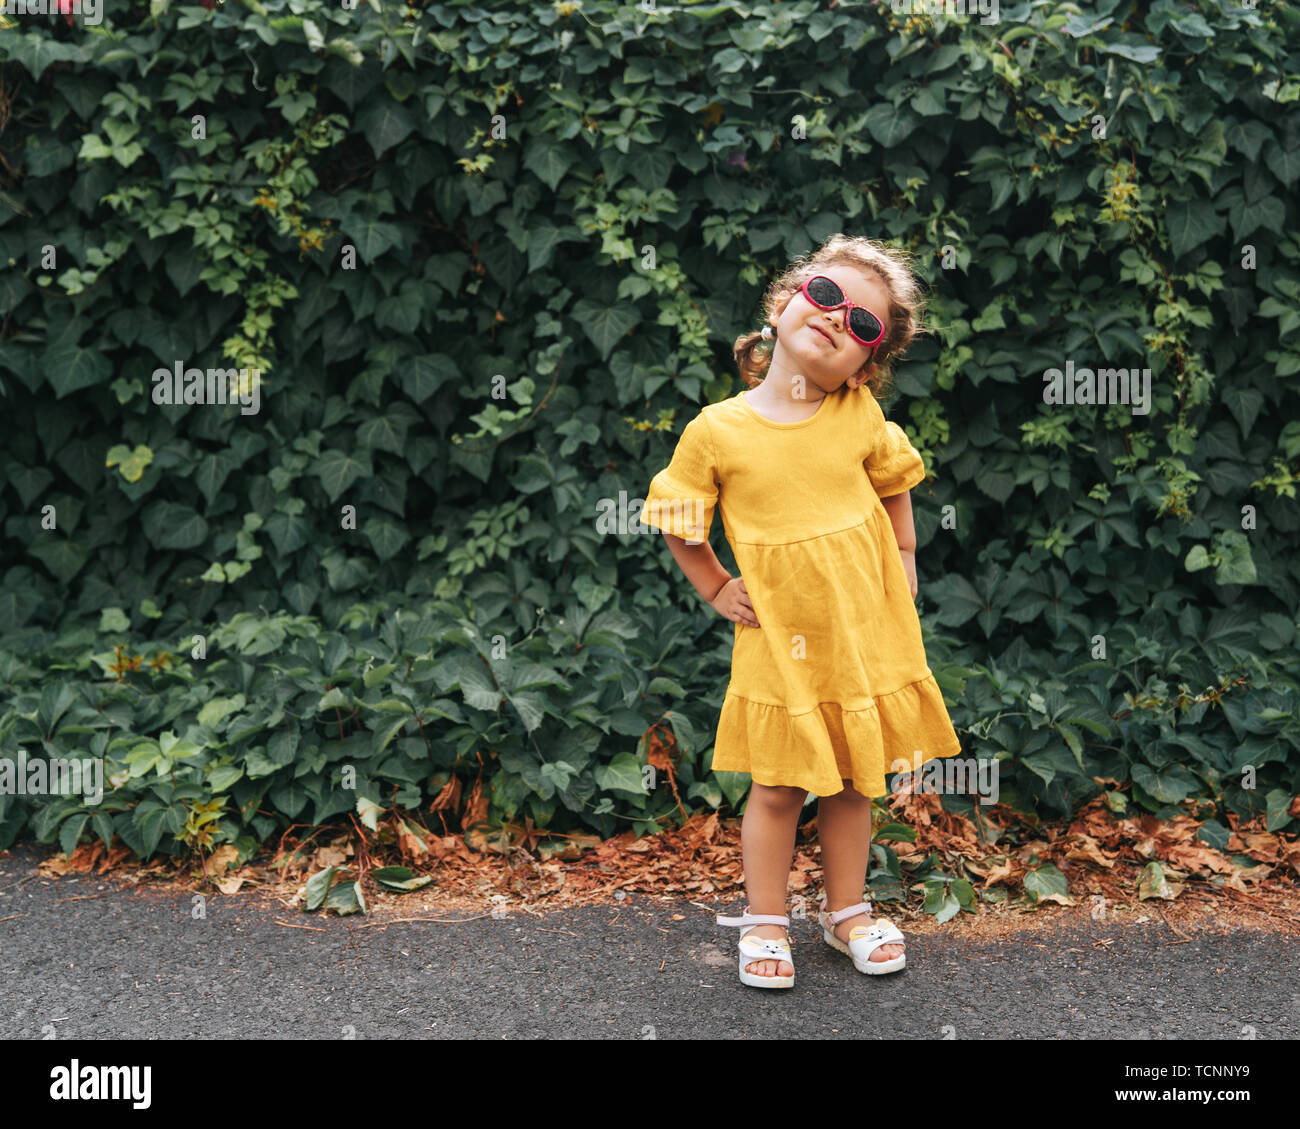 Portrait of Cute Blond Girl in Clothing Posing in  Sunny Day and Looking at the Camera at outdoors Stock Photo